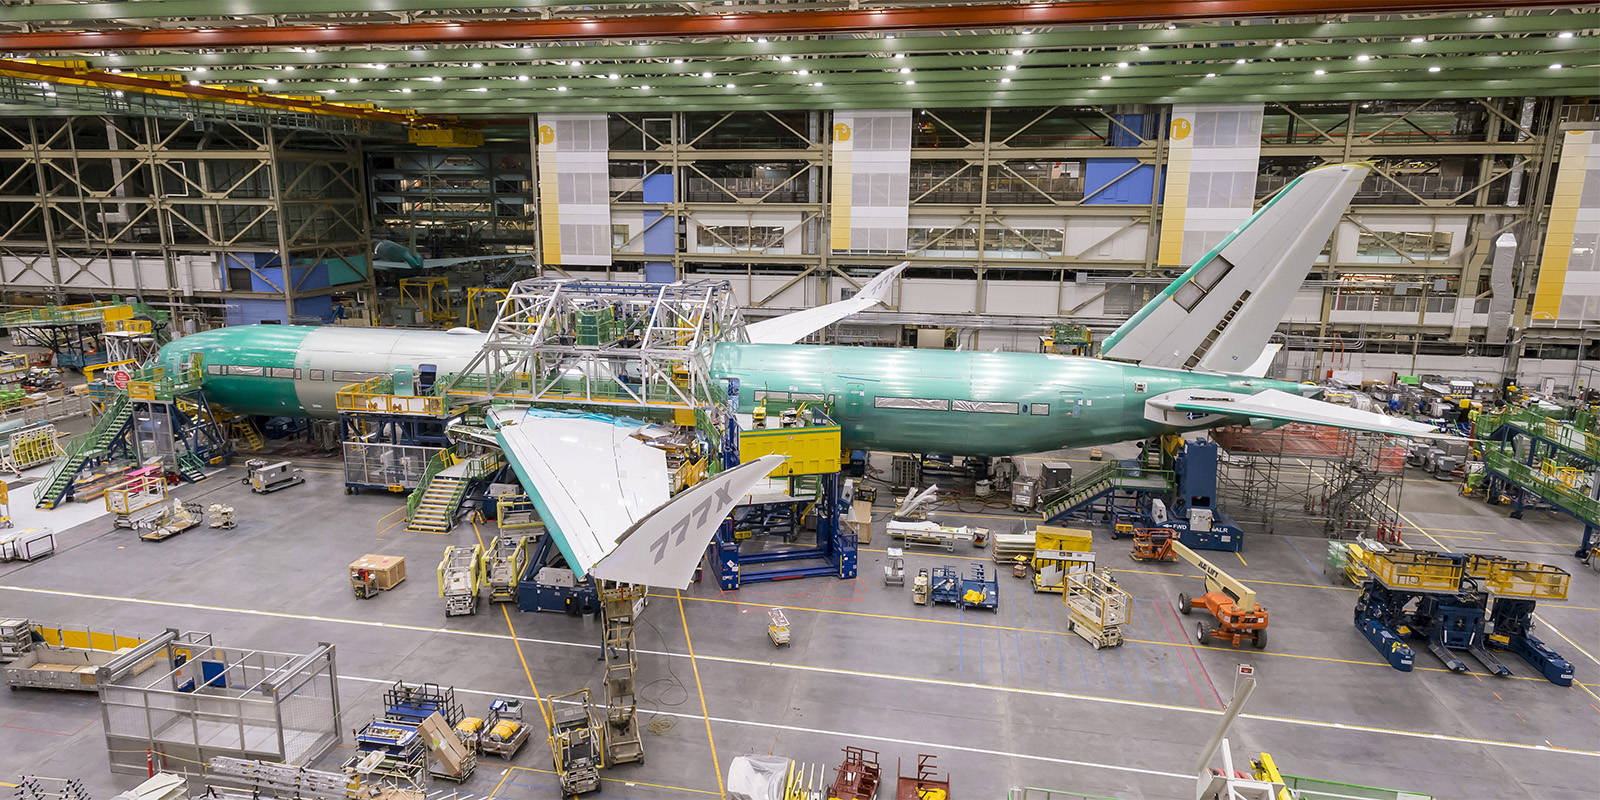 At 252 feet long (77 meters) from nose to tail, the 777X is the longest passenger jet Boeing has ever produced.